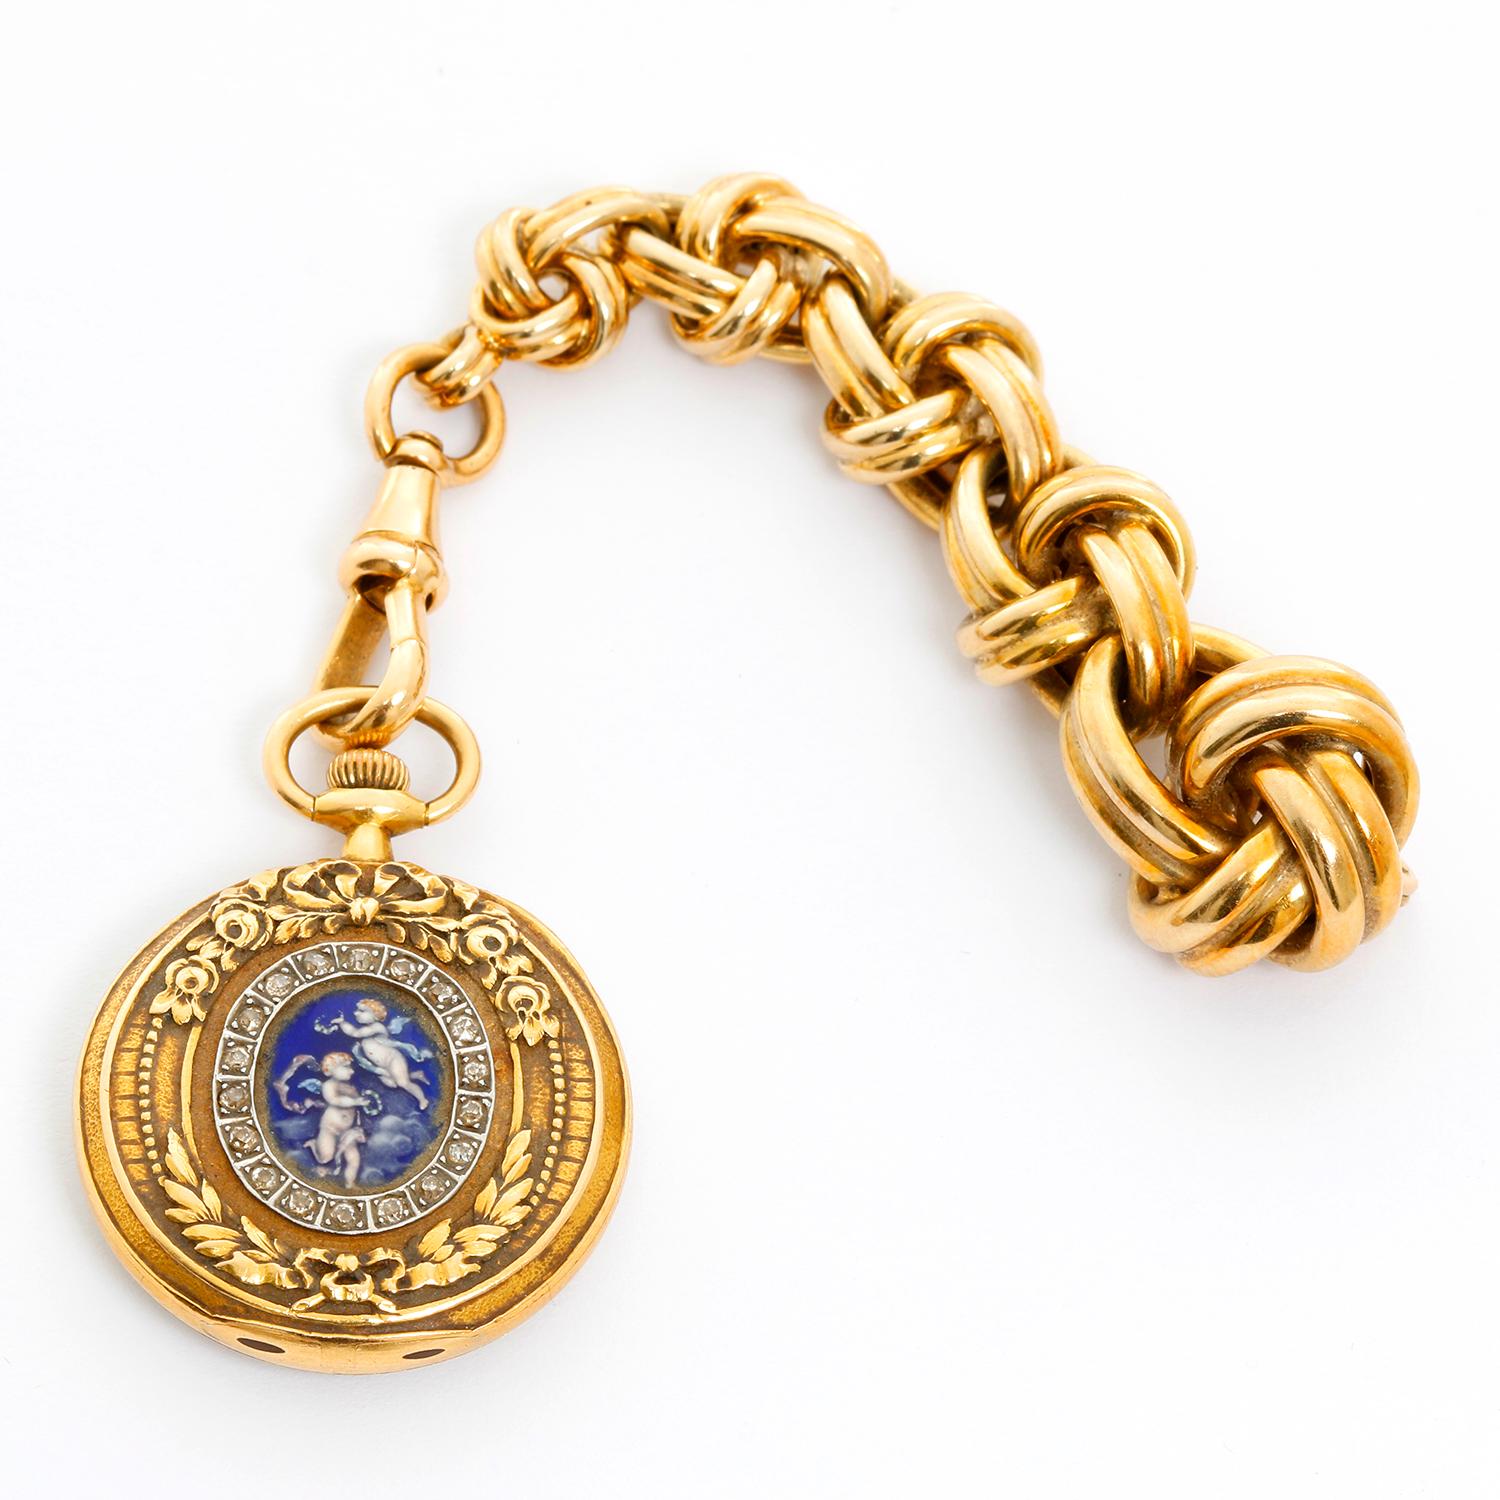 Tiffany & Co. Enameled 14K Yellow Gold Pocket Watch Brooch - Manual winding. 14K yellow gold; reverse pictures an impeccably executed enamel of two angels with diamonds surrounded ( 27.4 mm ). White dial with a double sunk dial with Arabic numerals